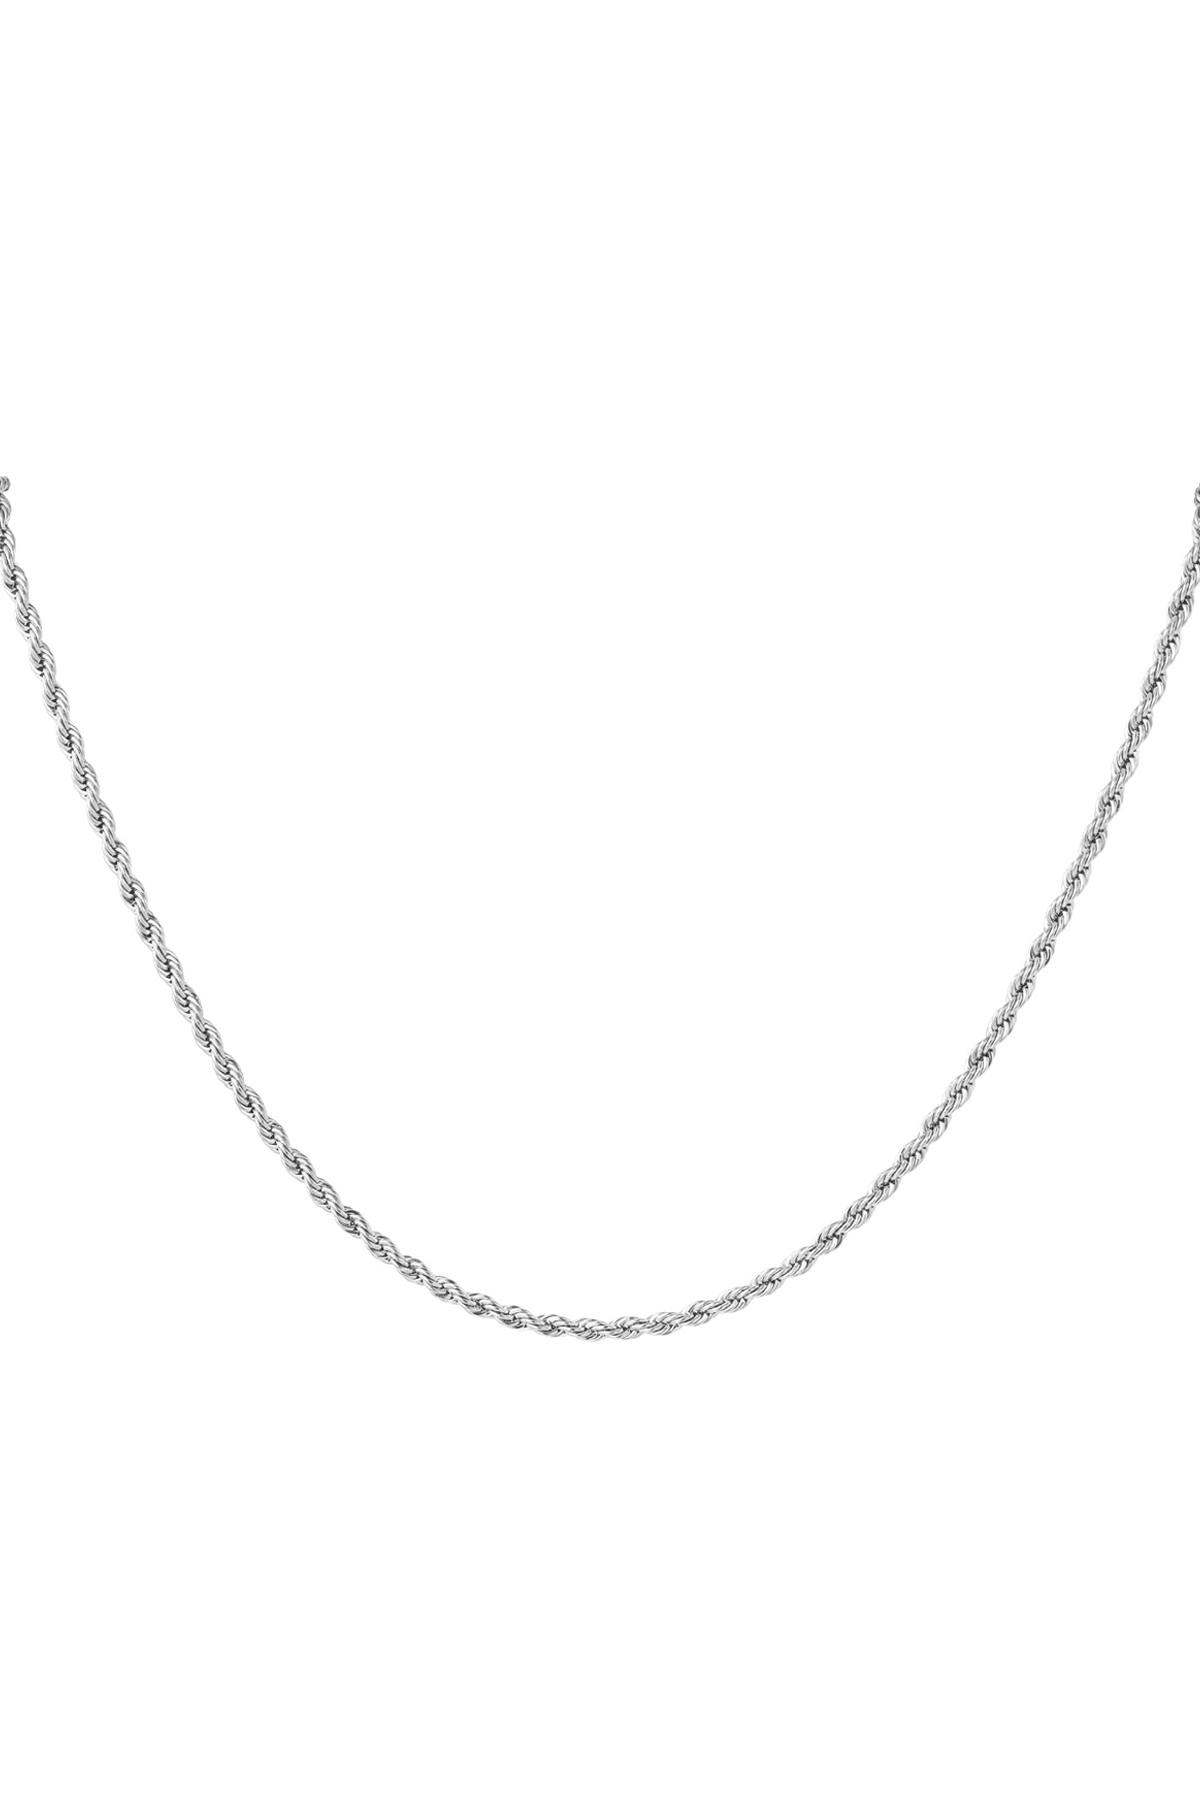 Unisex necklace twisted fine - silver-3.0MM 